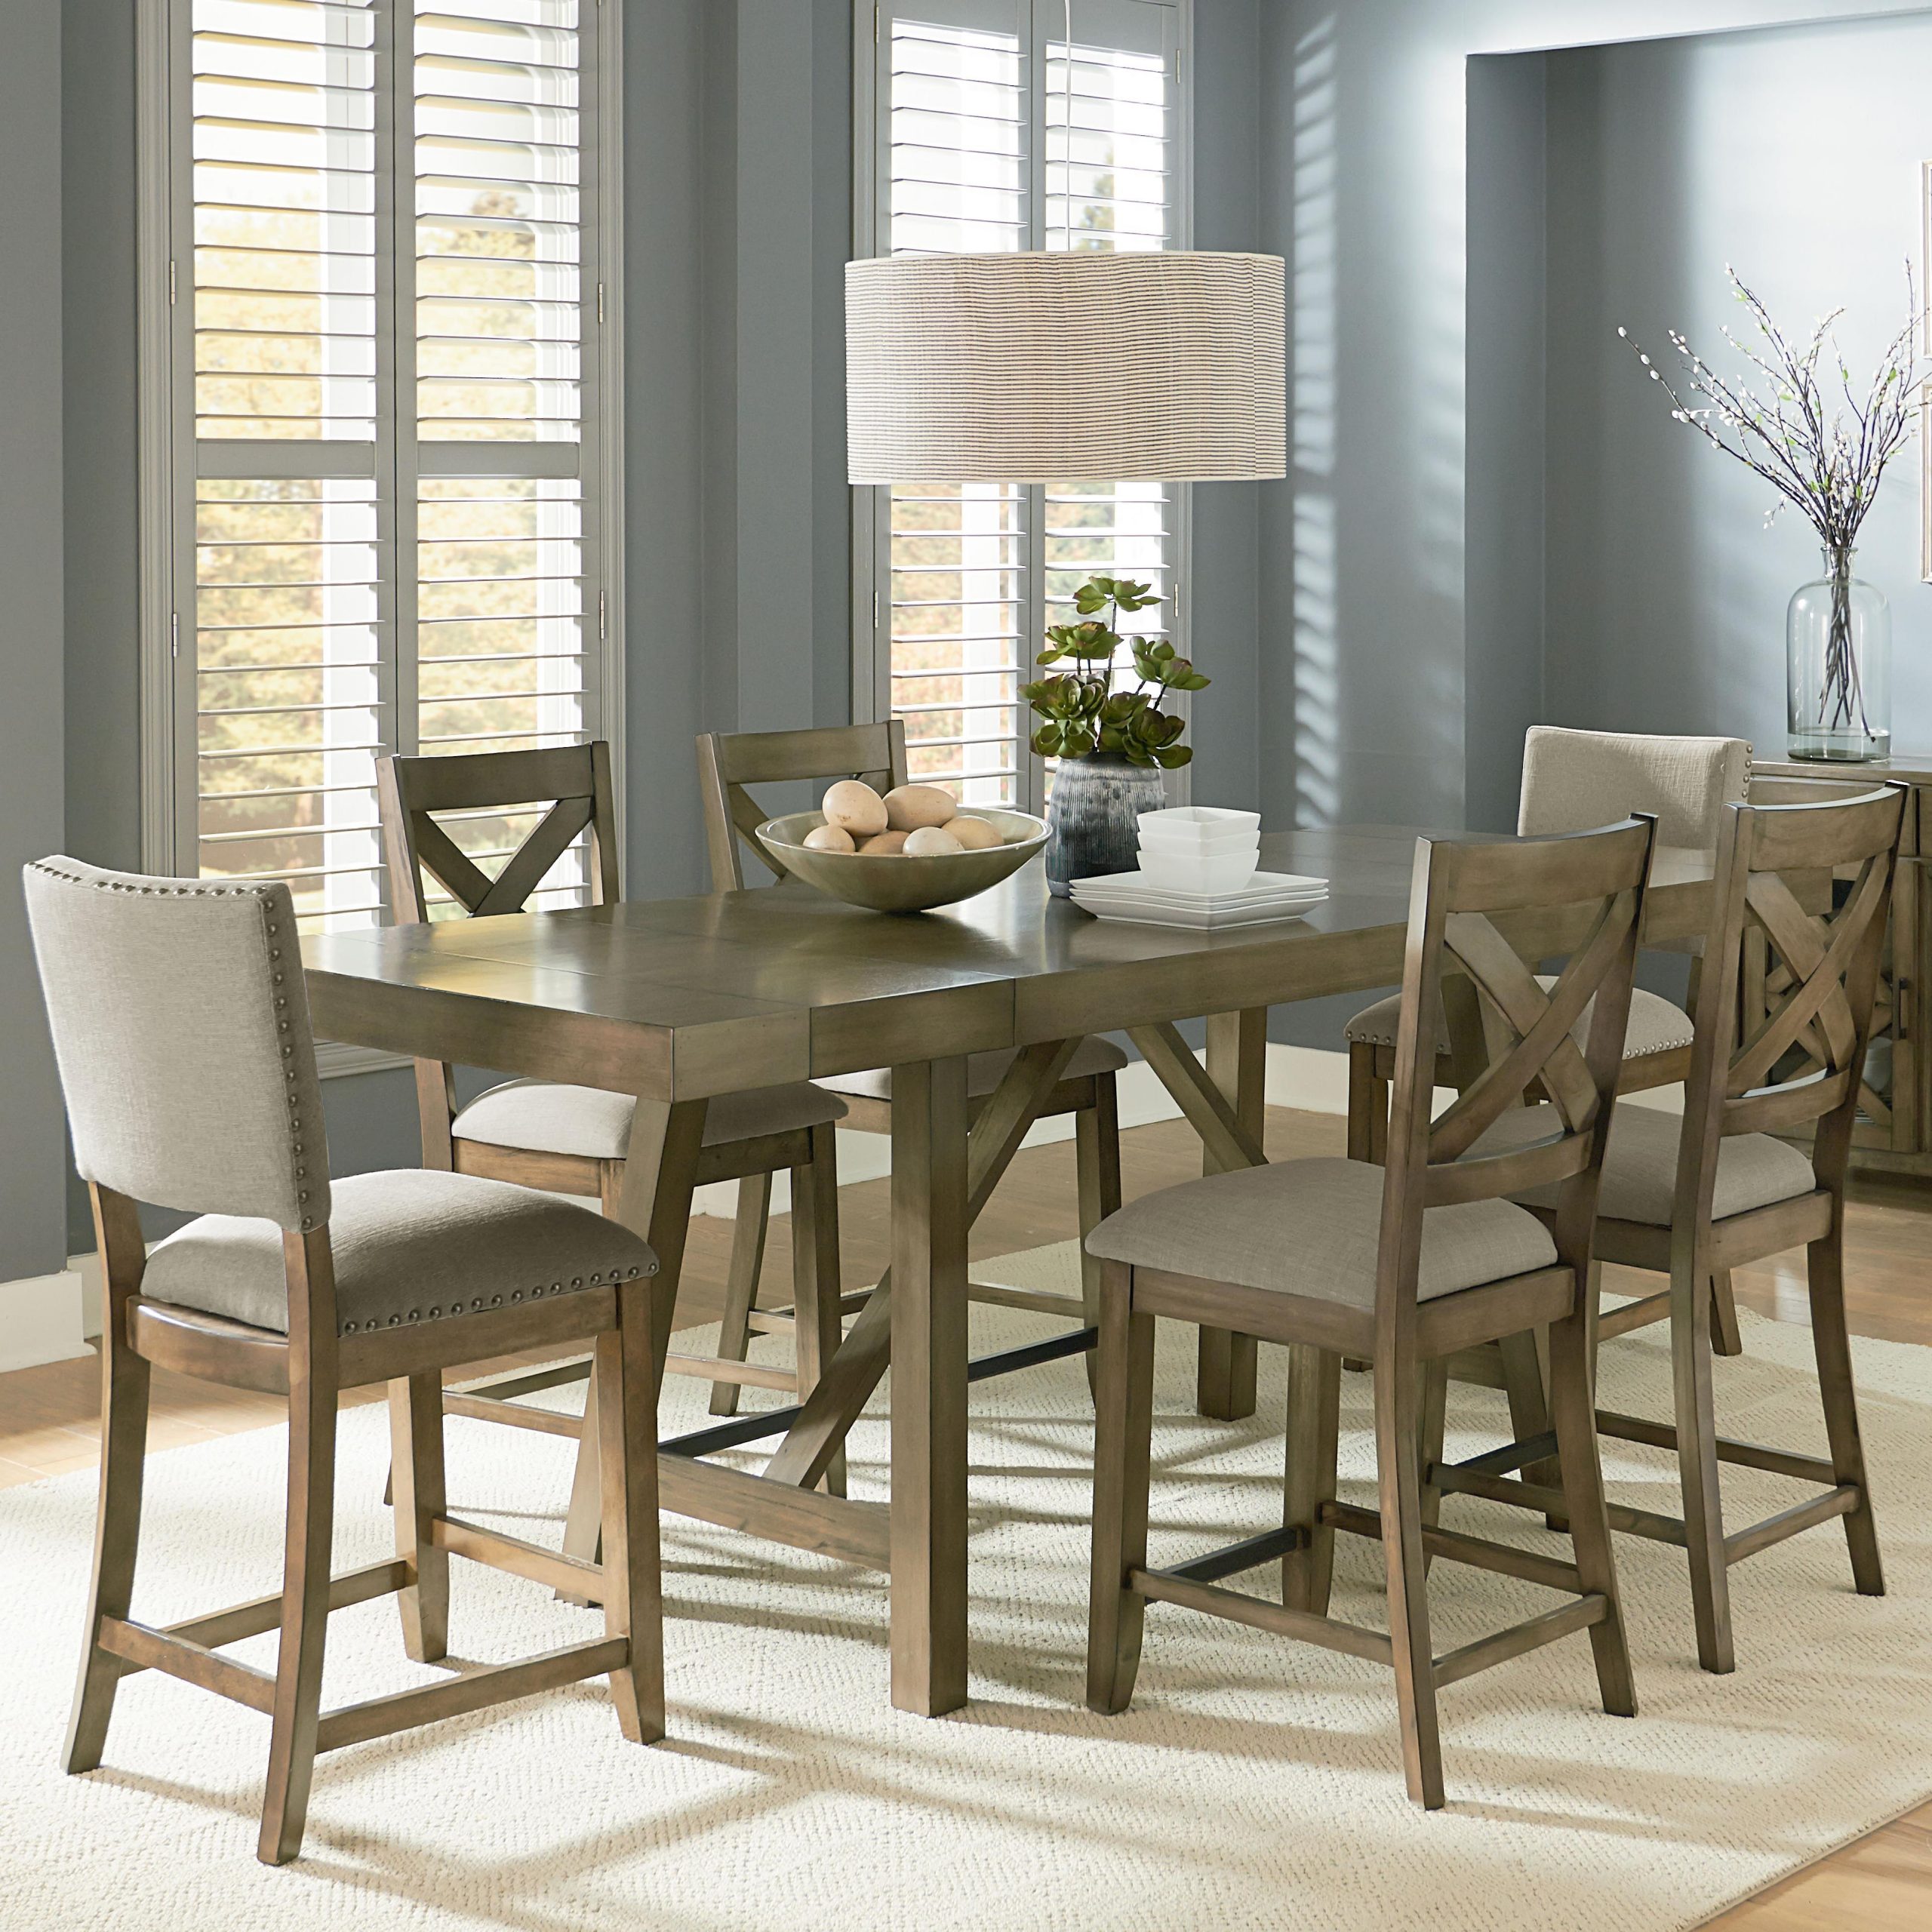 7 Piece White Dining Room Sets